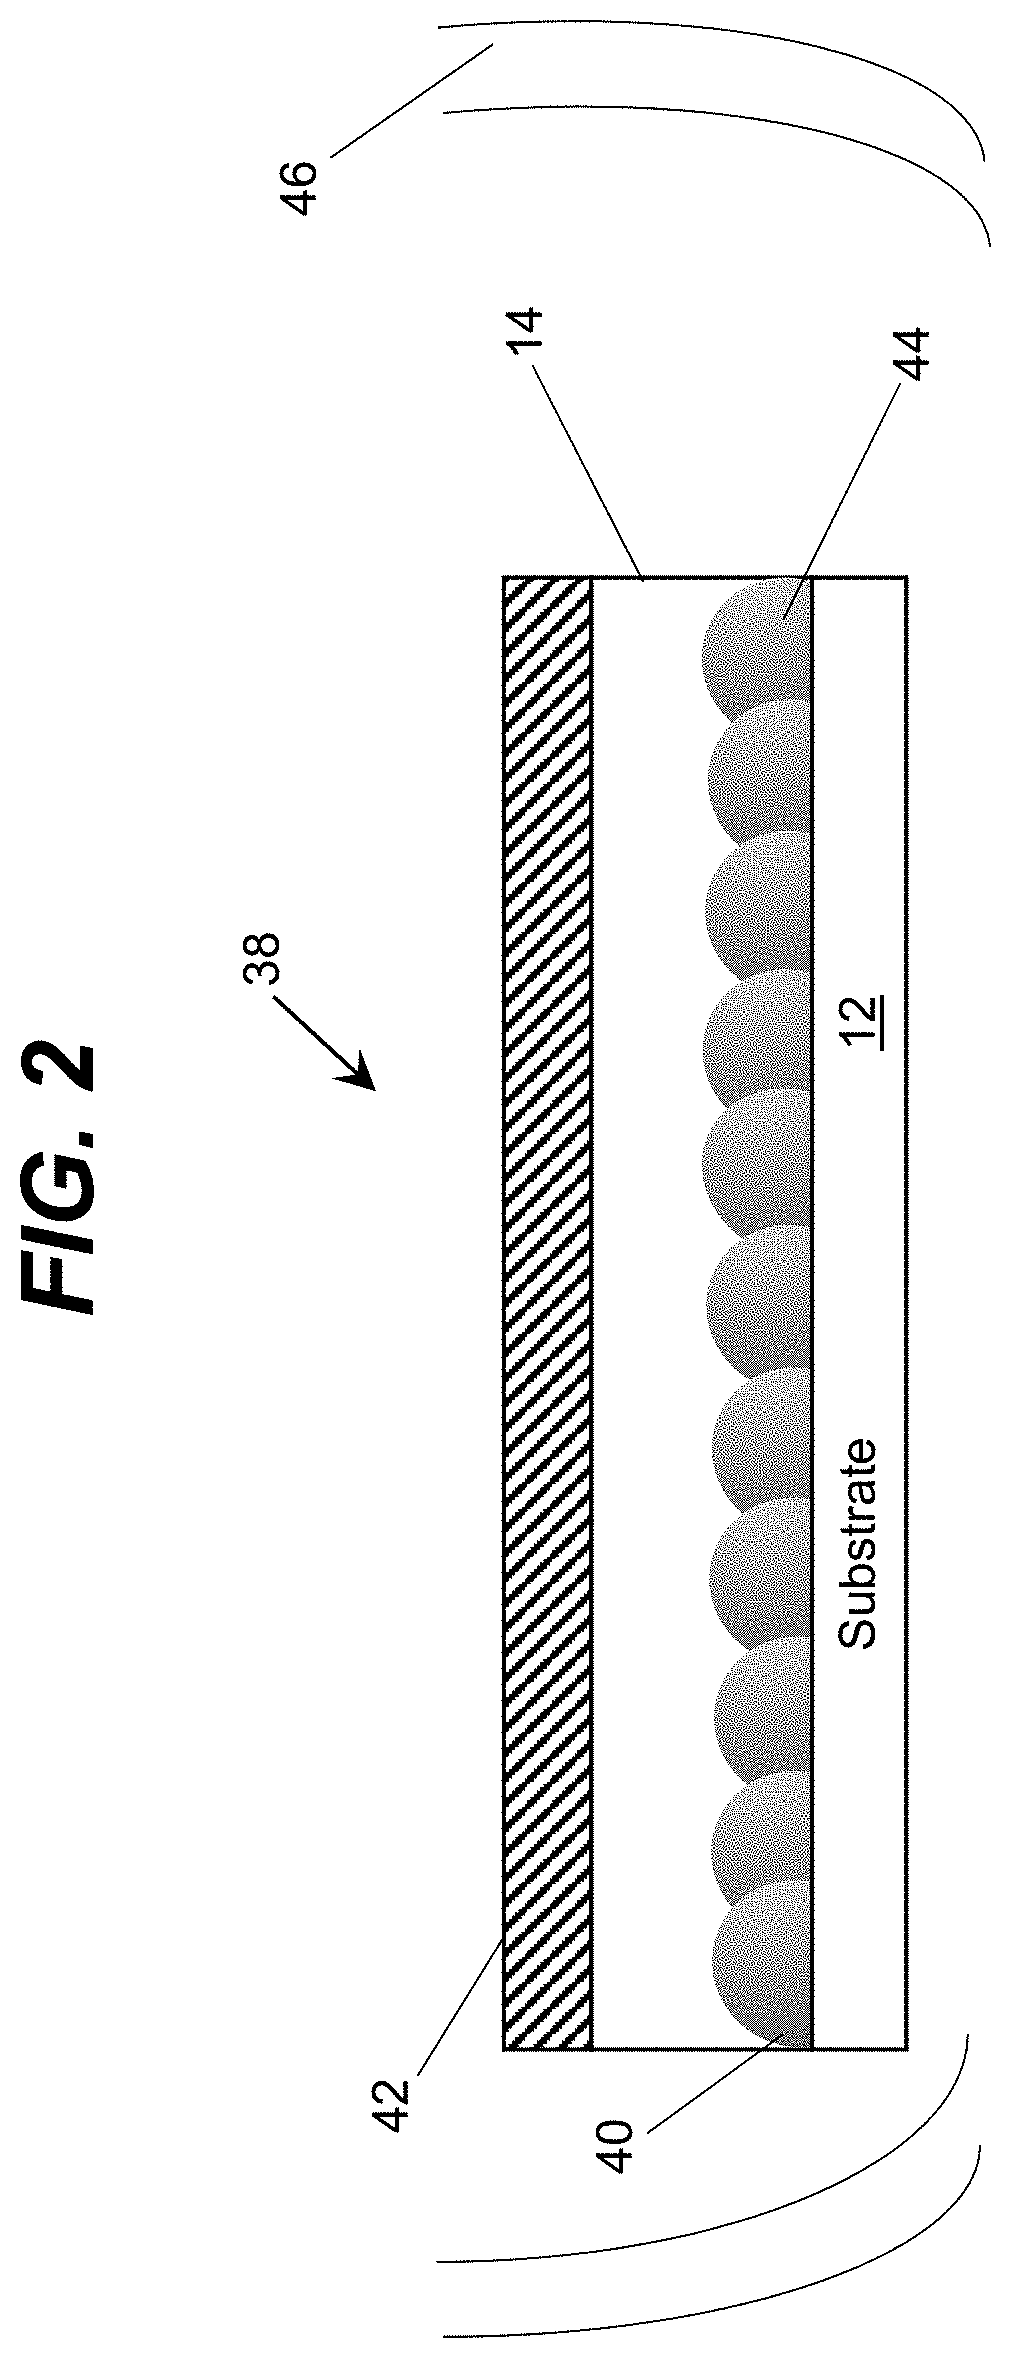 Semiconductor method having annealing of epitaxially grown layers to form semiconductor structure with low dislocation density